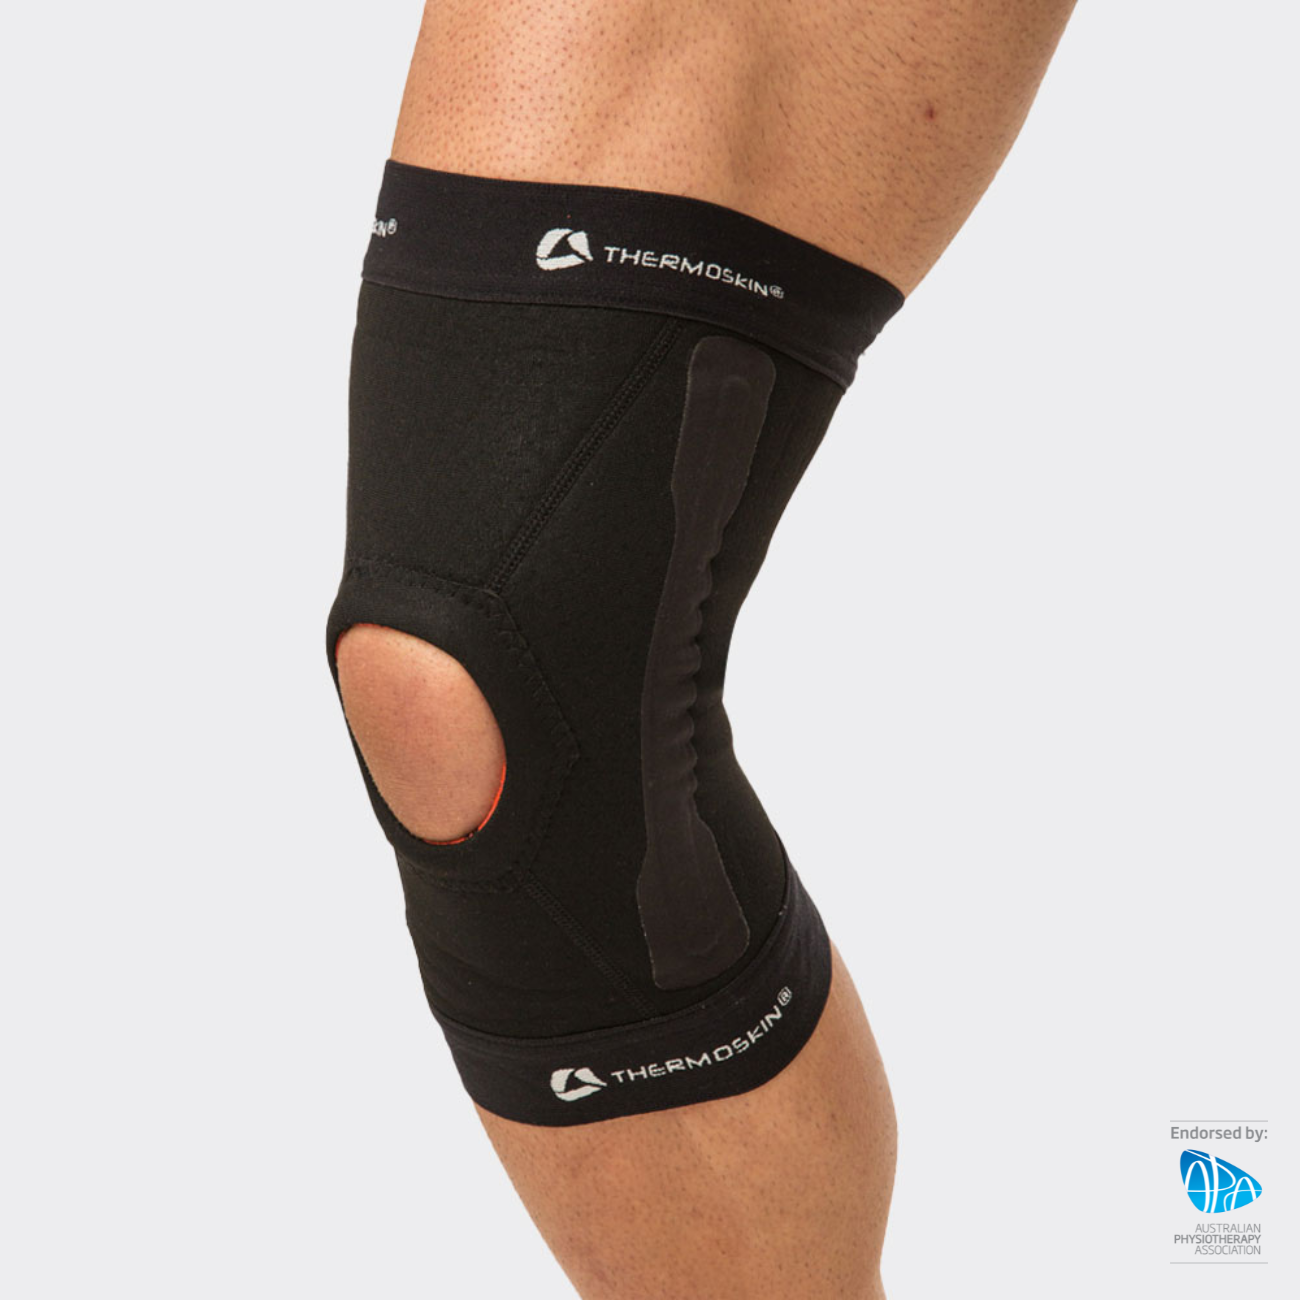 Compression Knee Braces & Support Sleeves - Thermoskin